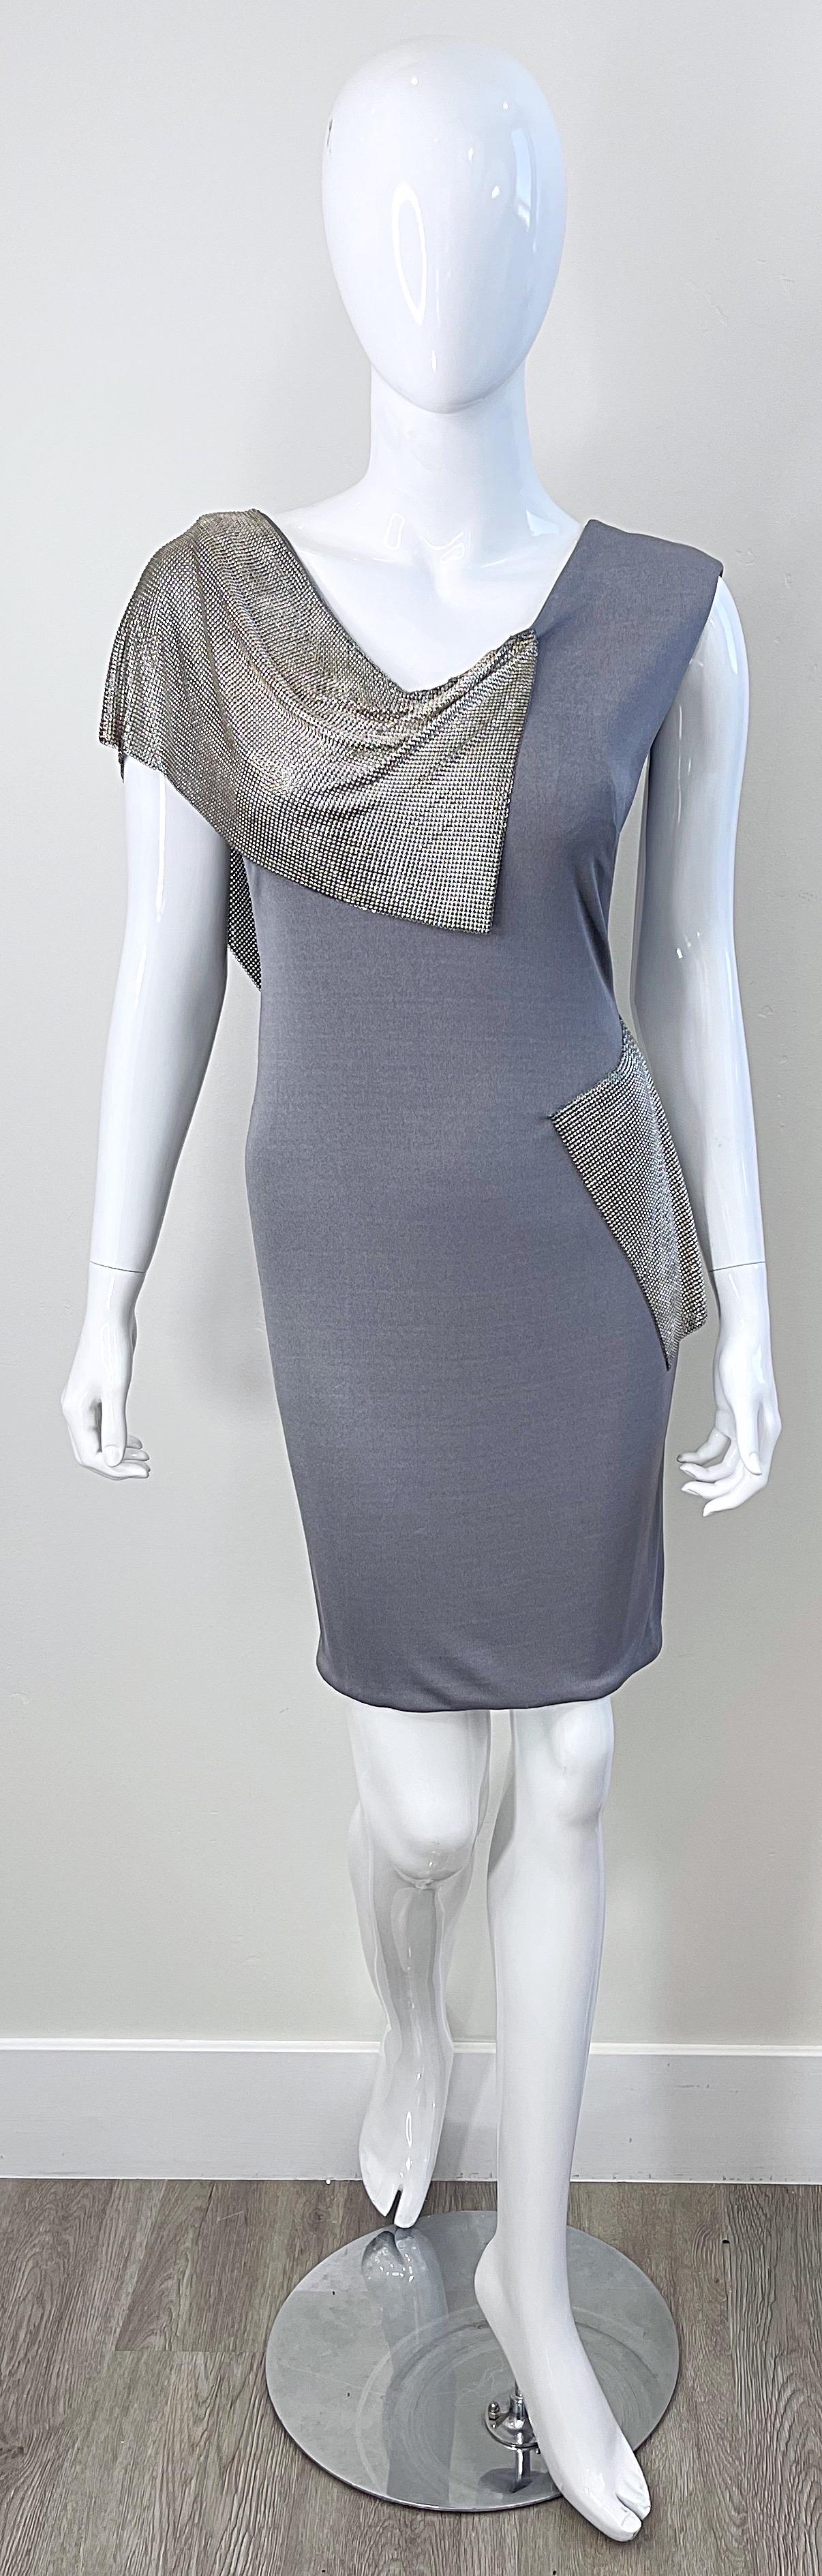 Amazing early 2000s CD GREENE gray silk jersey and silver mesh Chainmail dress ! Greene actually studied architecture, but his recalling was fashion. His dresses are like works of art, and his architecture background is definitely apparent. 
The